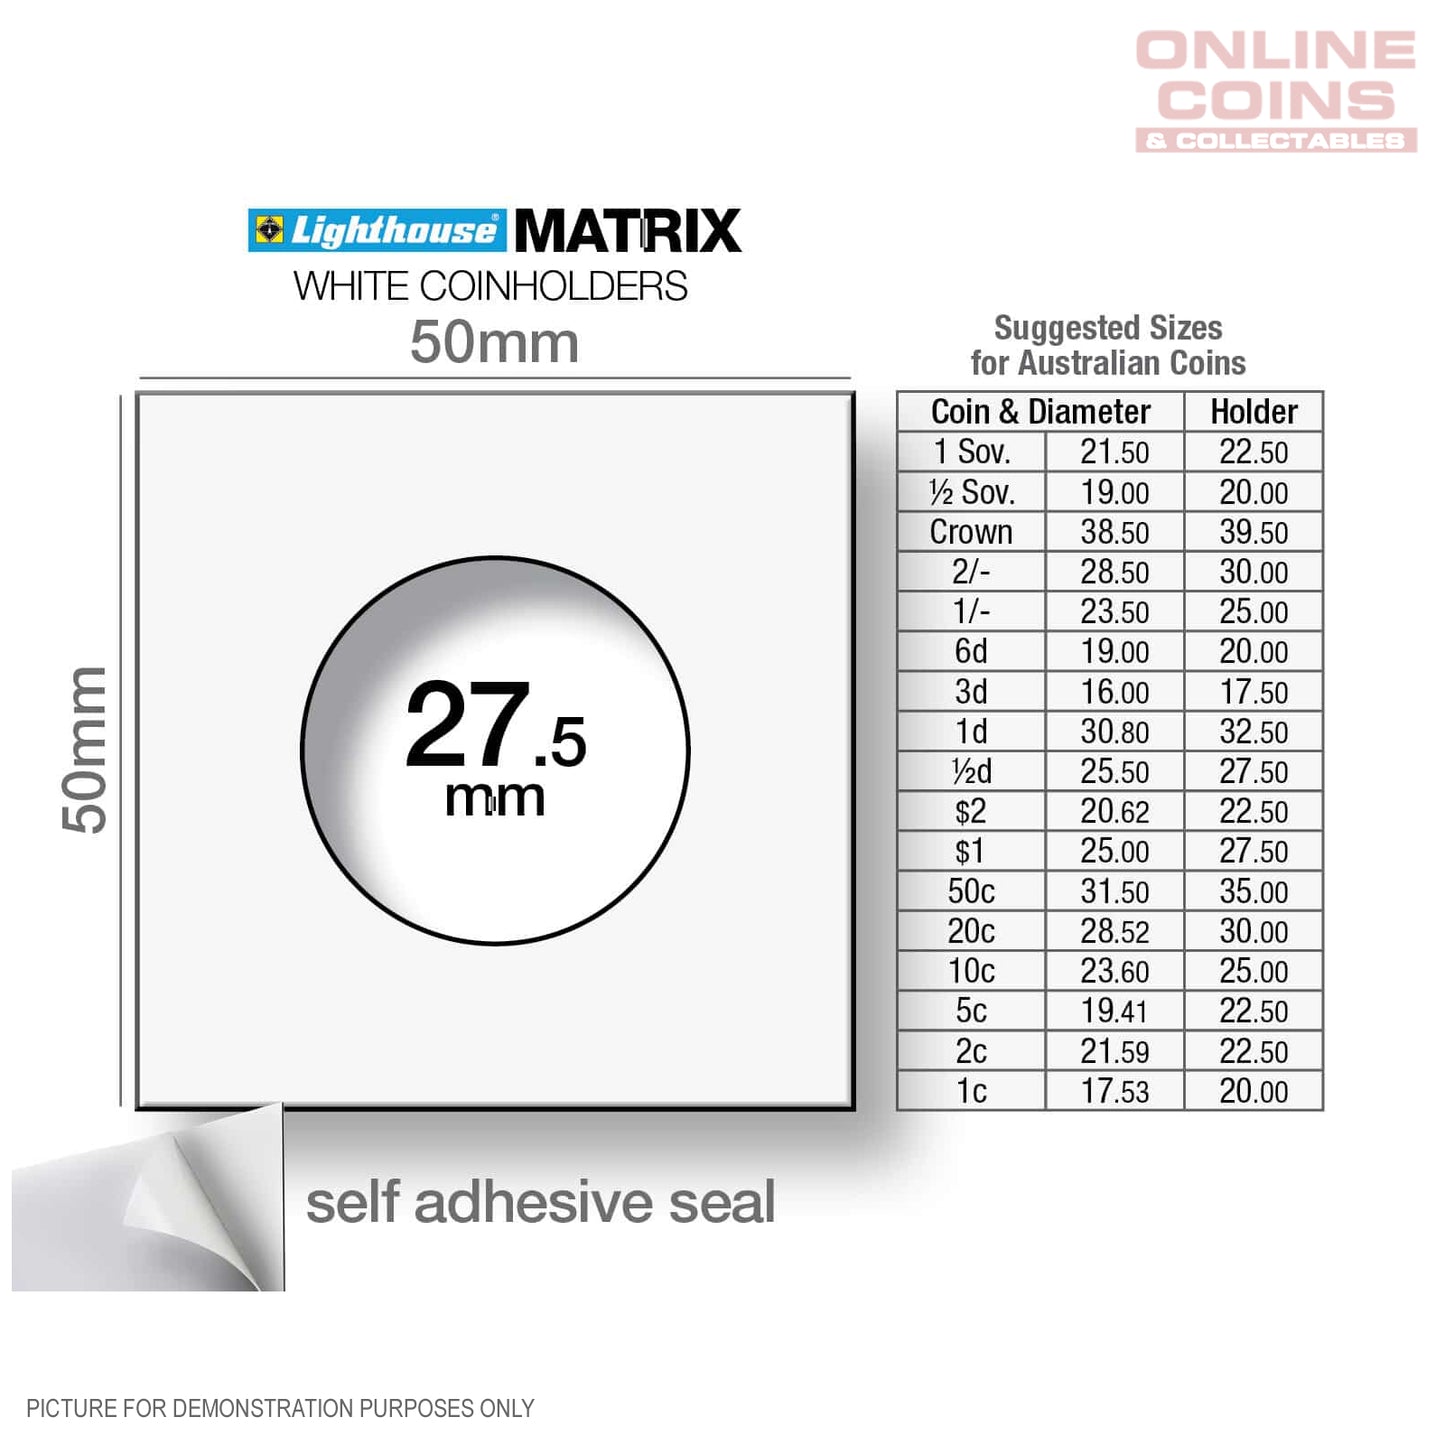 Lighthouse MATRIX WHITE 27.5mm Self Adhesive 2"x2" Coin Holders (Suitable For Australian $1 Coins and Half-Pennies)